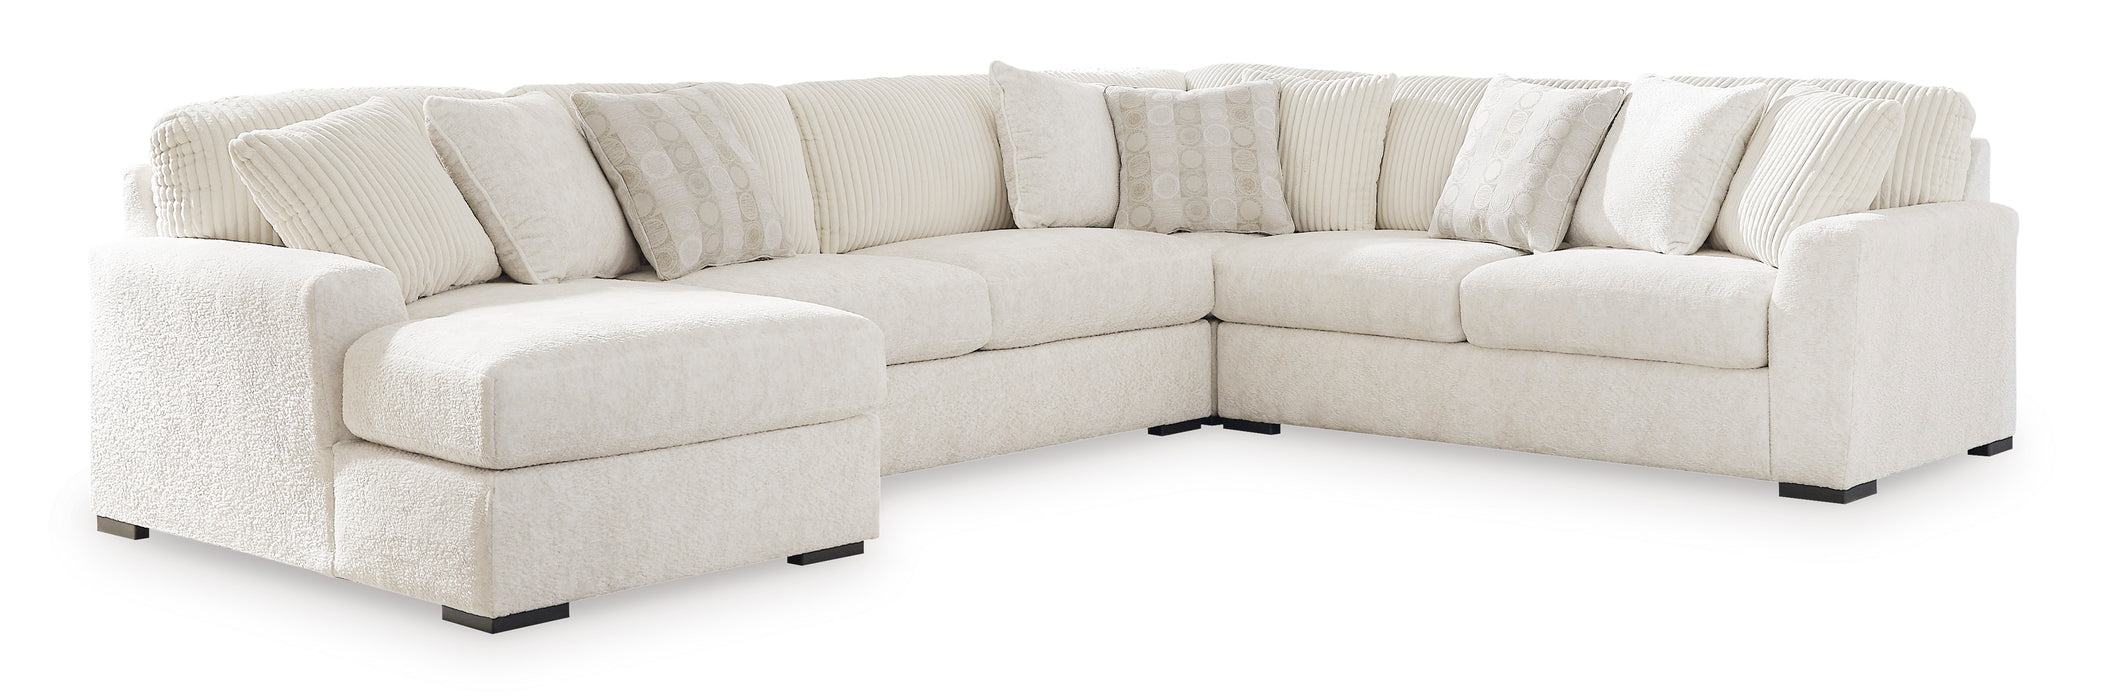 Chessington Ivory 4-Piece LAF Sectional with Chaise